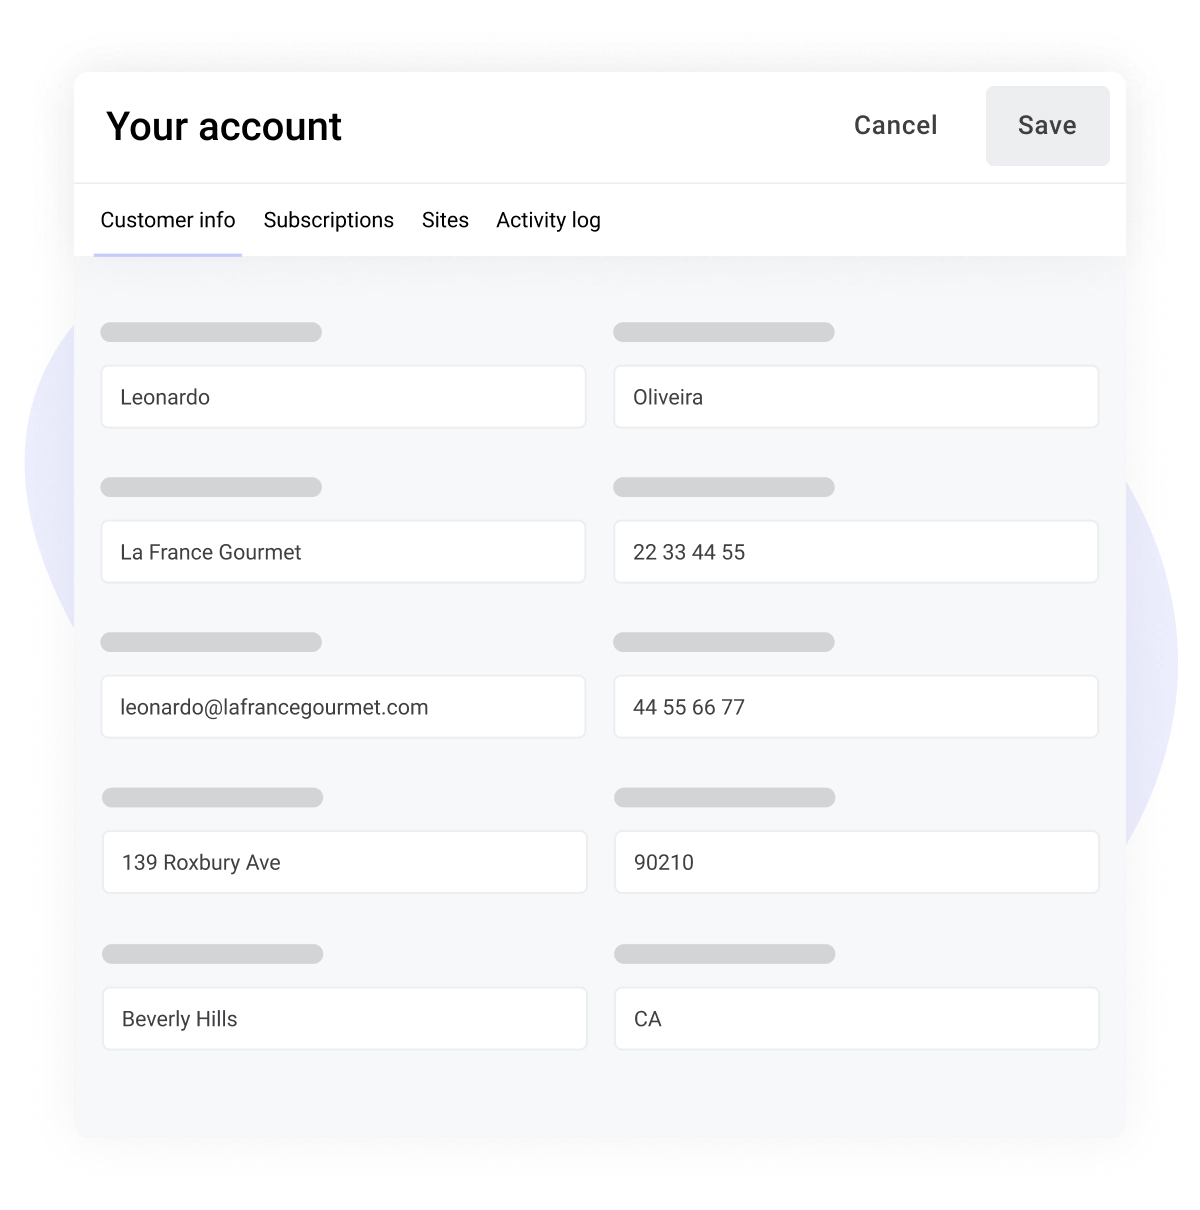 Illustration of our multi-site management tool, Reseller Admin Interface. Under Account info, a reseller partner can see the associated customer info, subscriptions, site information, and activity log for a website.